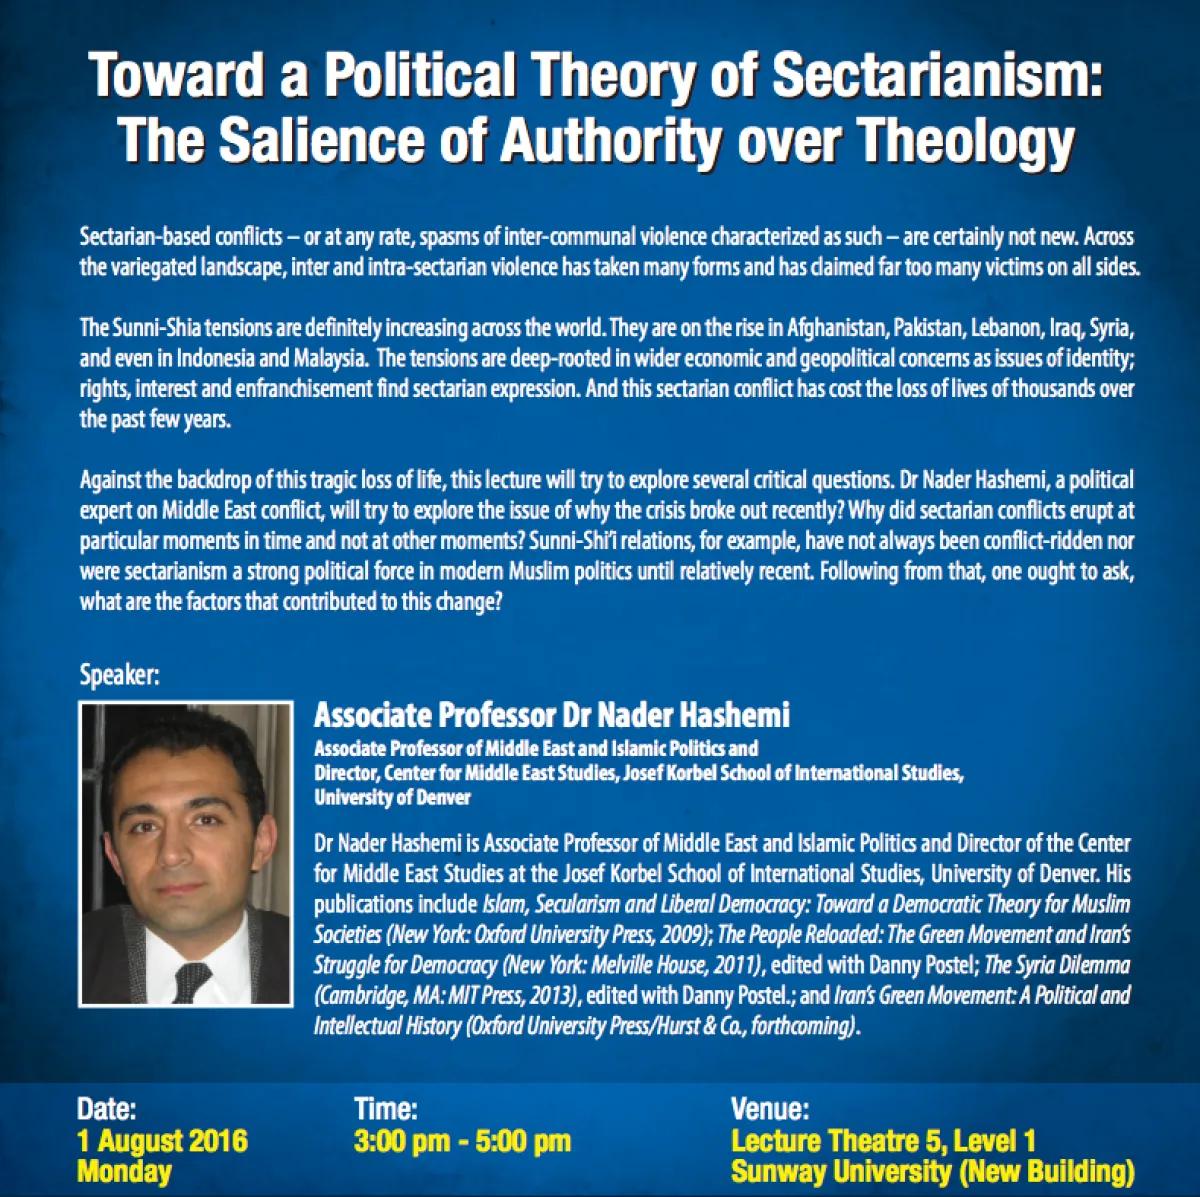 Toward a Political Theory of Sectarianism: The Salience of Authority over Theology